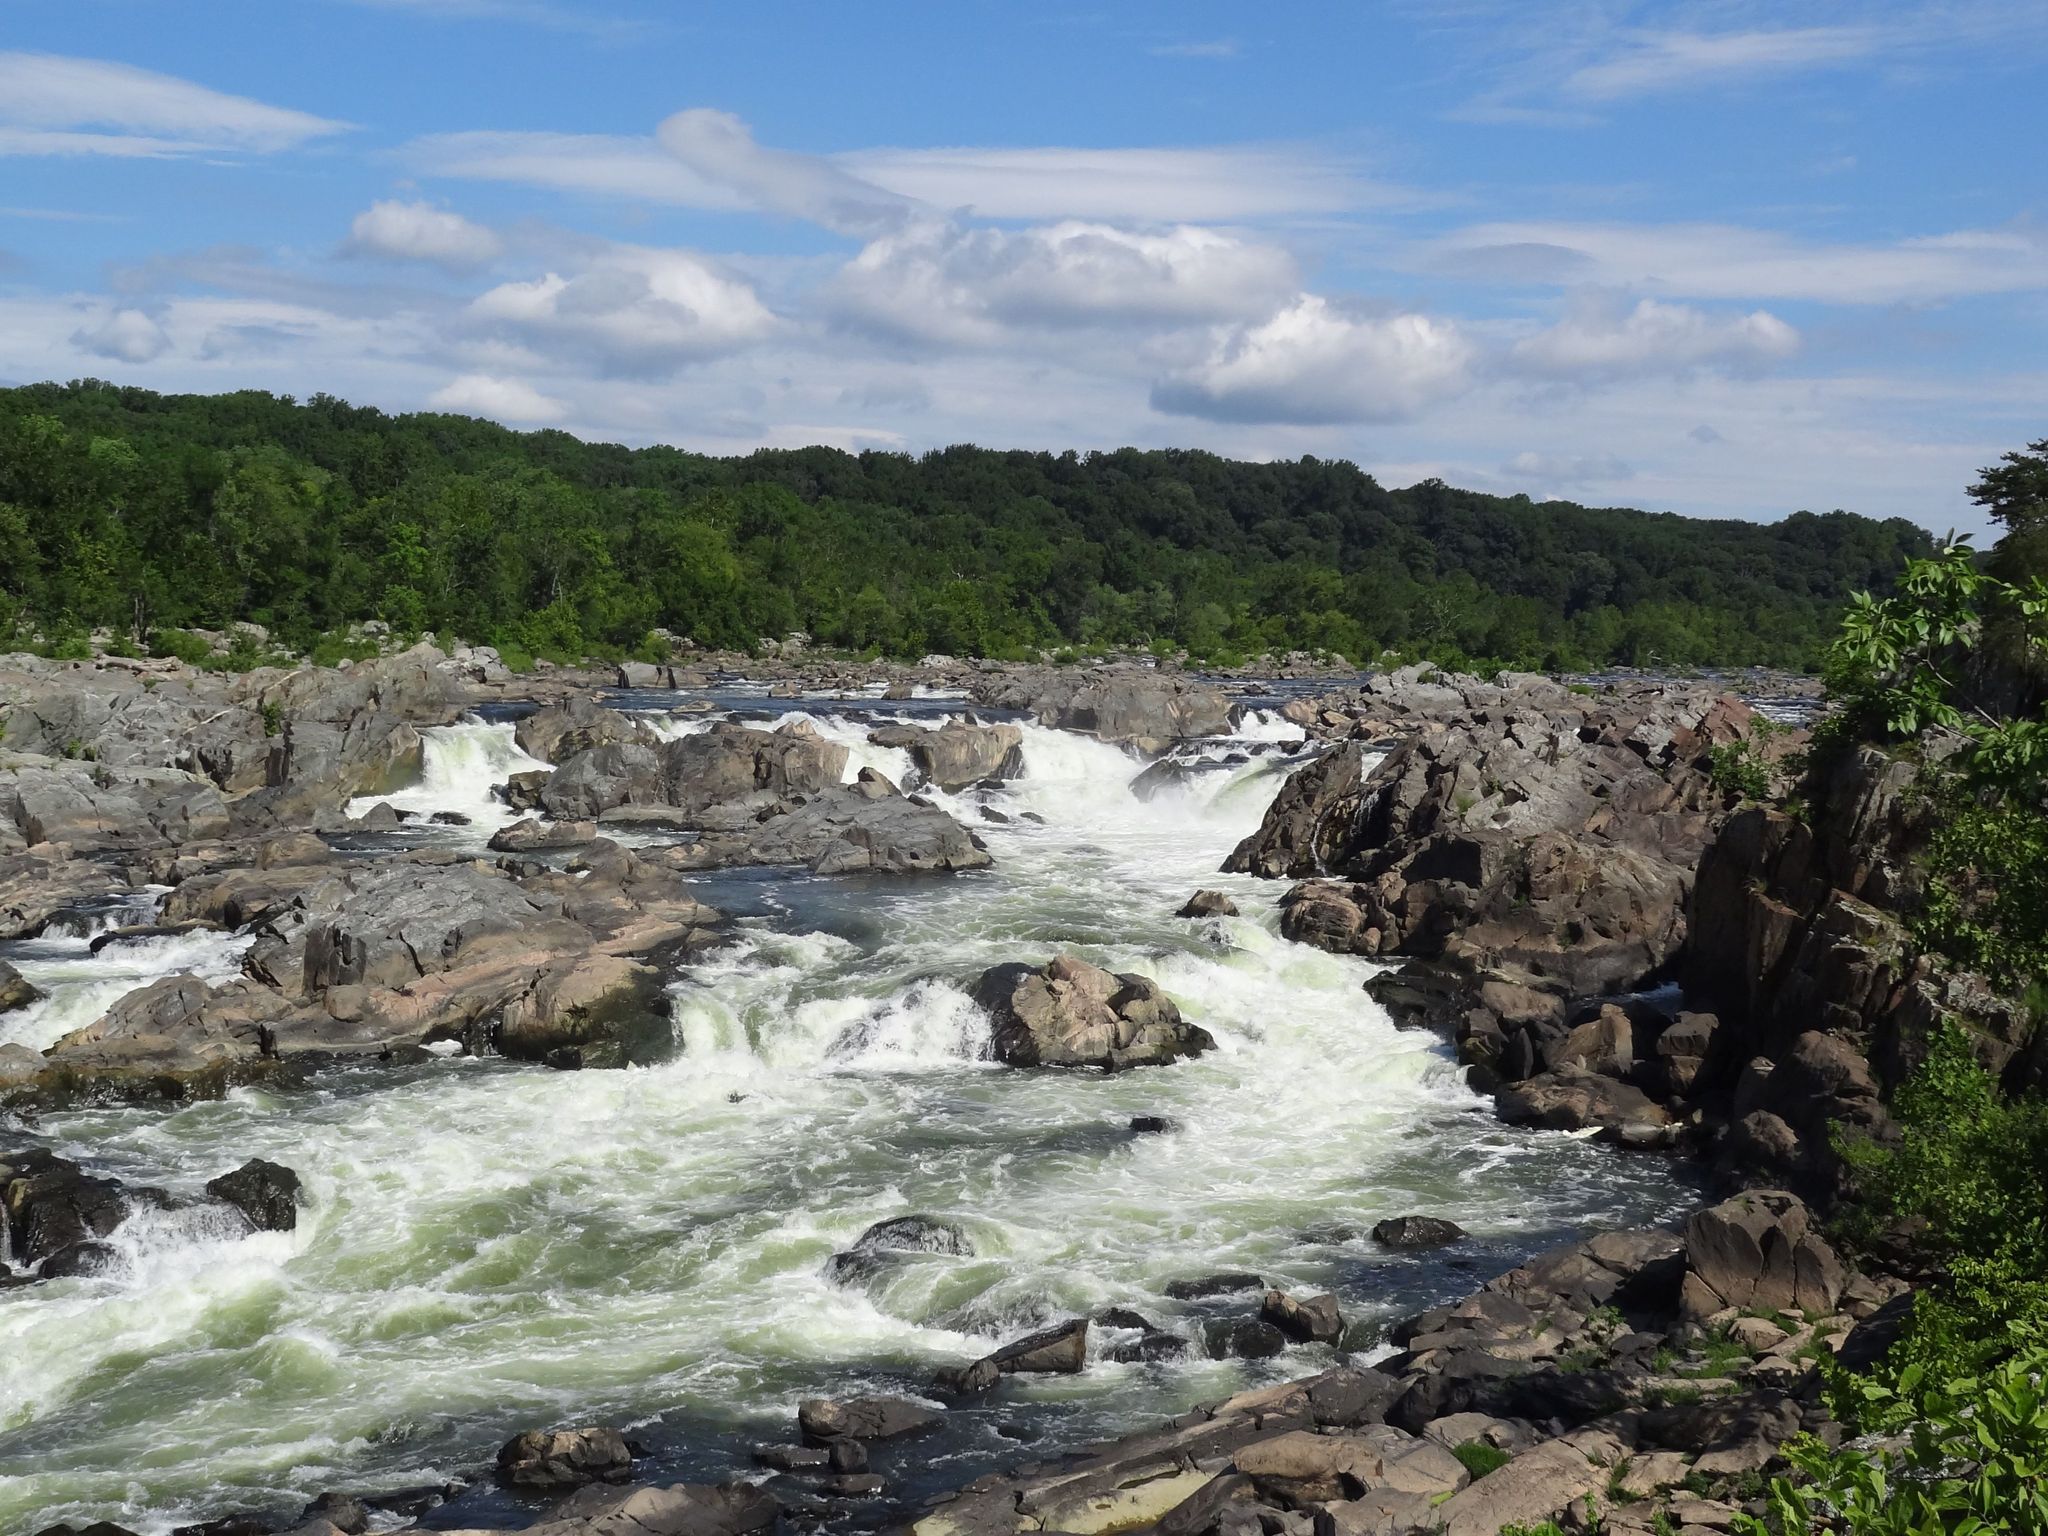 The area of Great Falls is one of the reasons for the C&O Canal needed to be built for boat traffic.